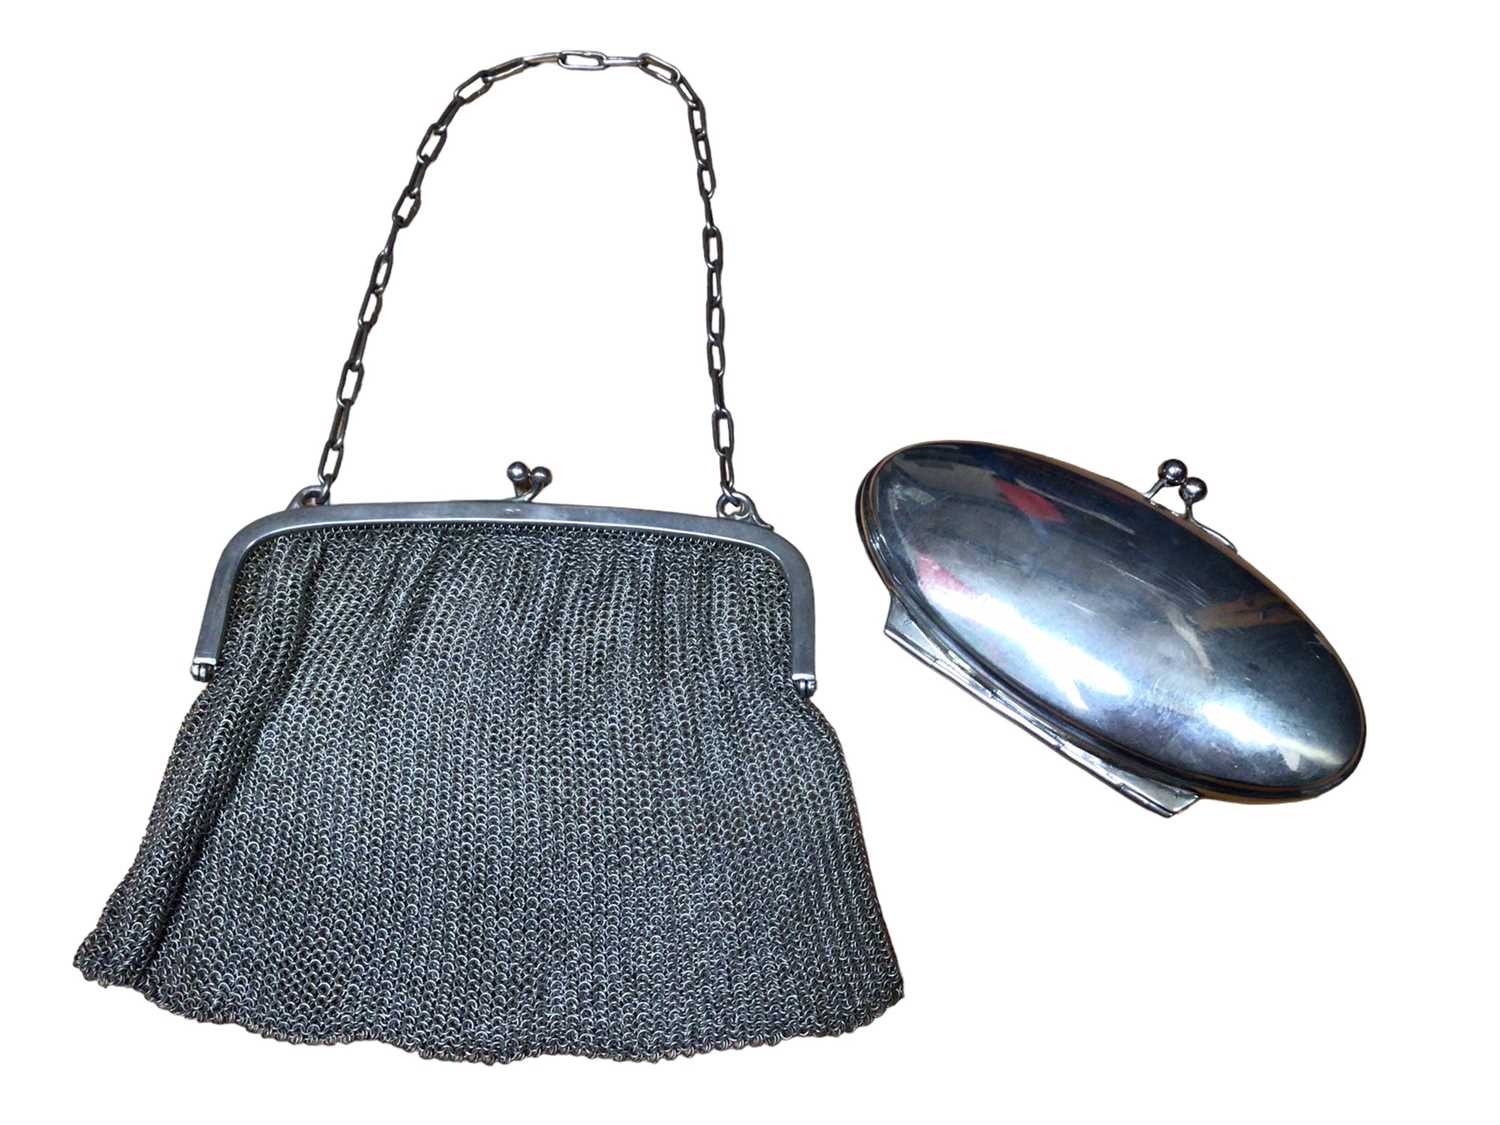 Lot 159 - 1920s silver mesh purse and one other oval silver purse with leather lined interior